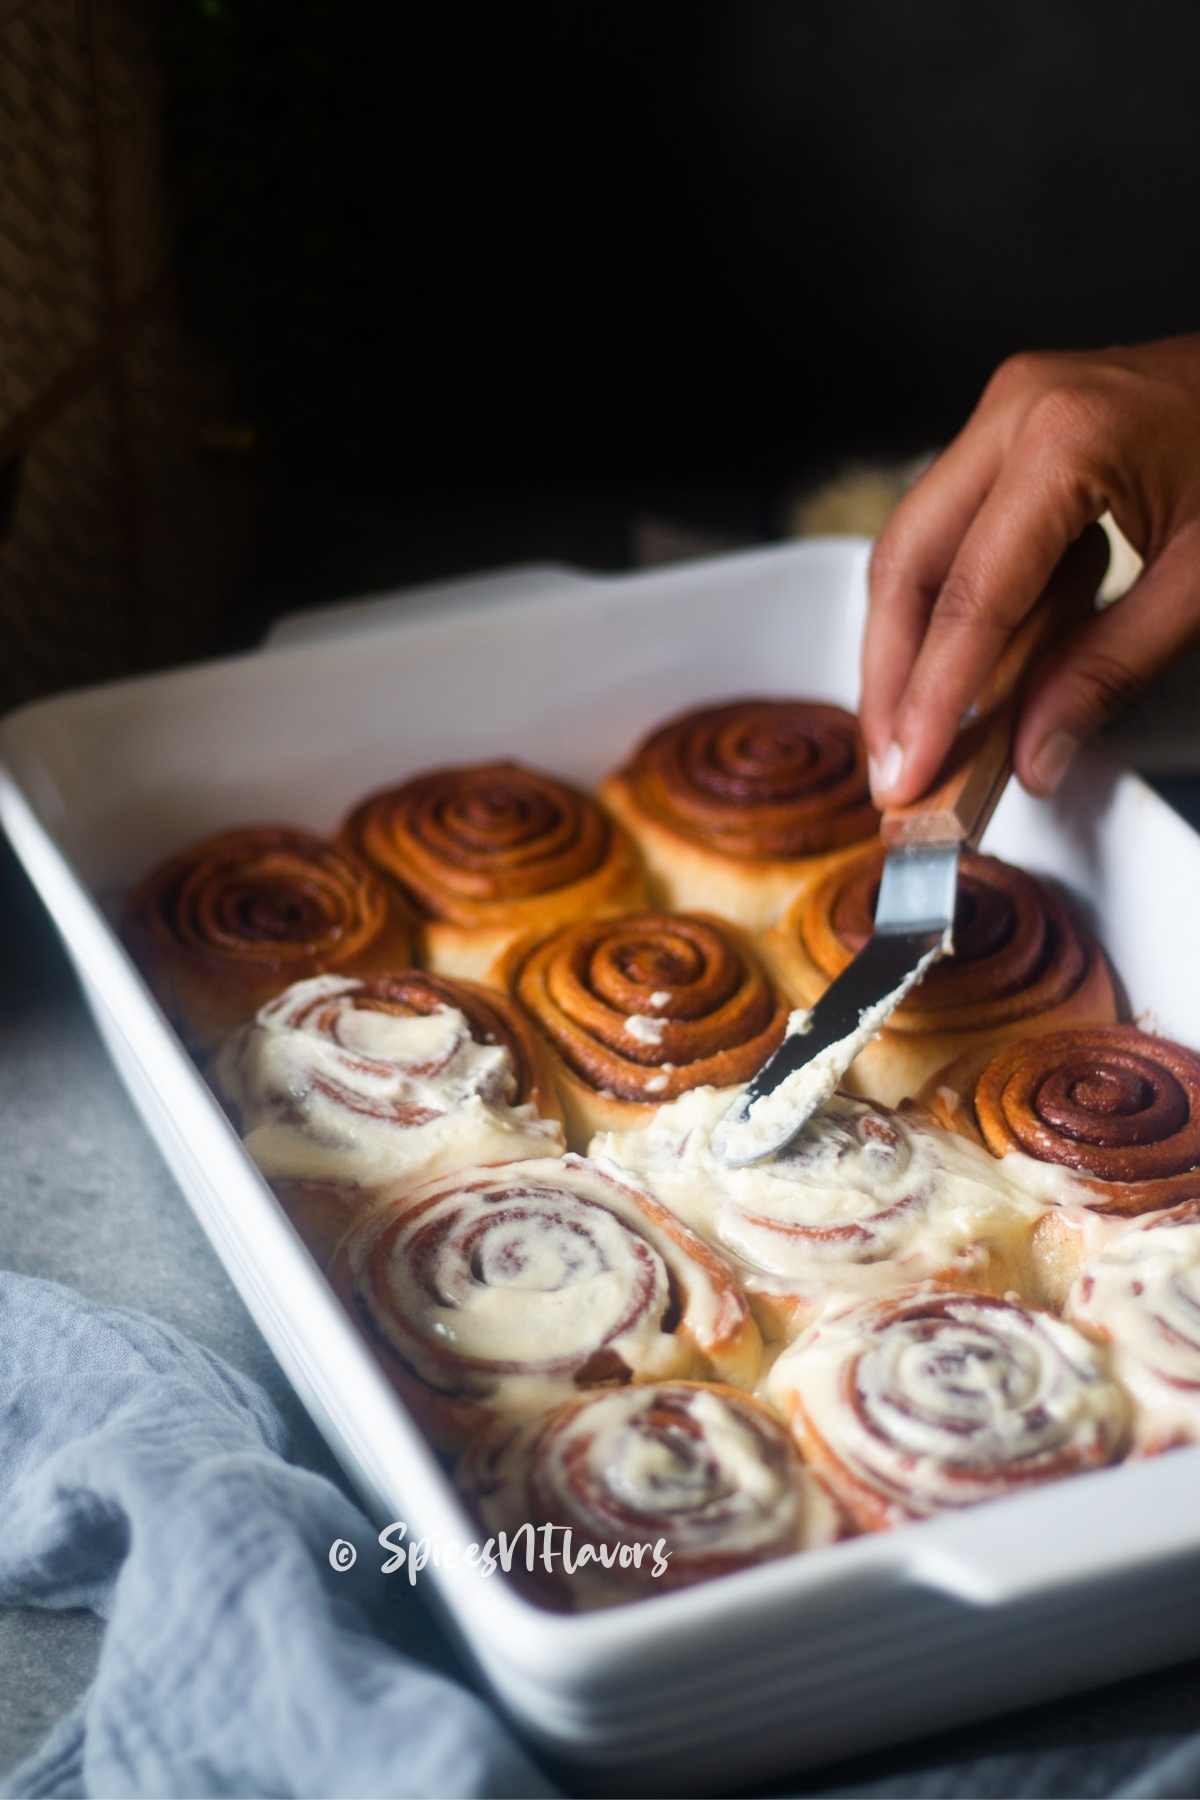 smear the icing on top of the rolls